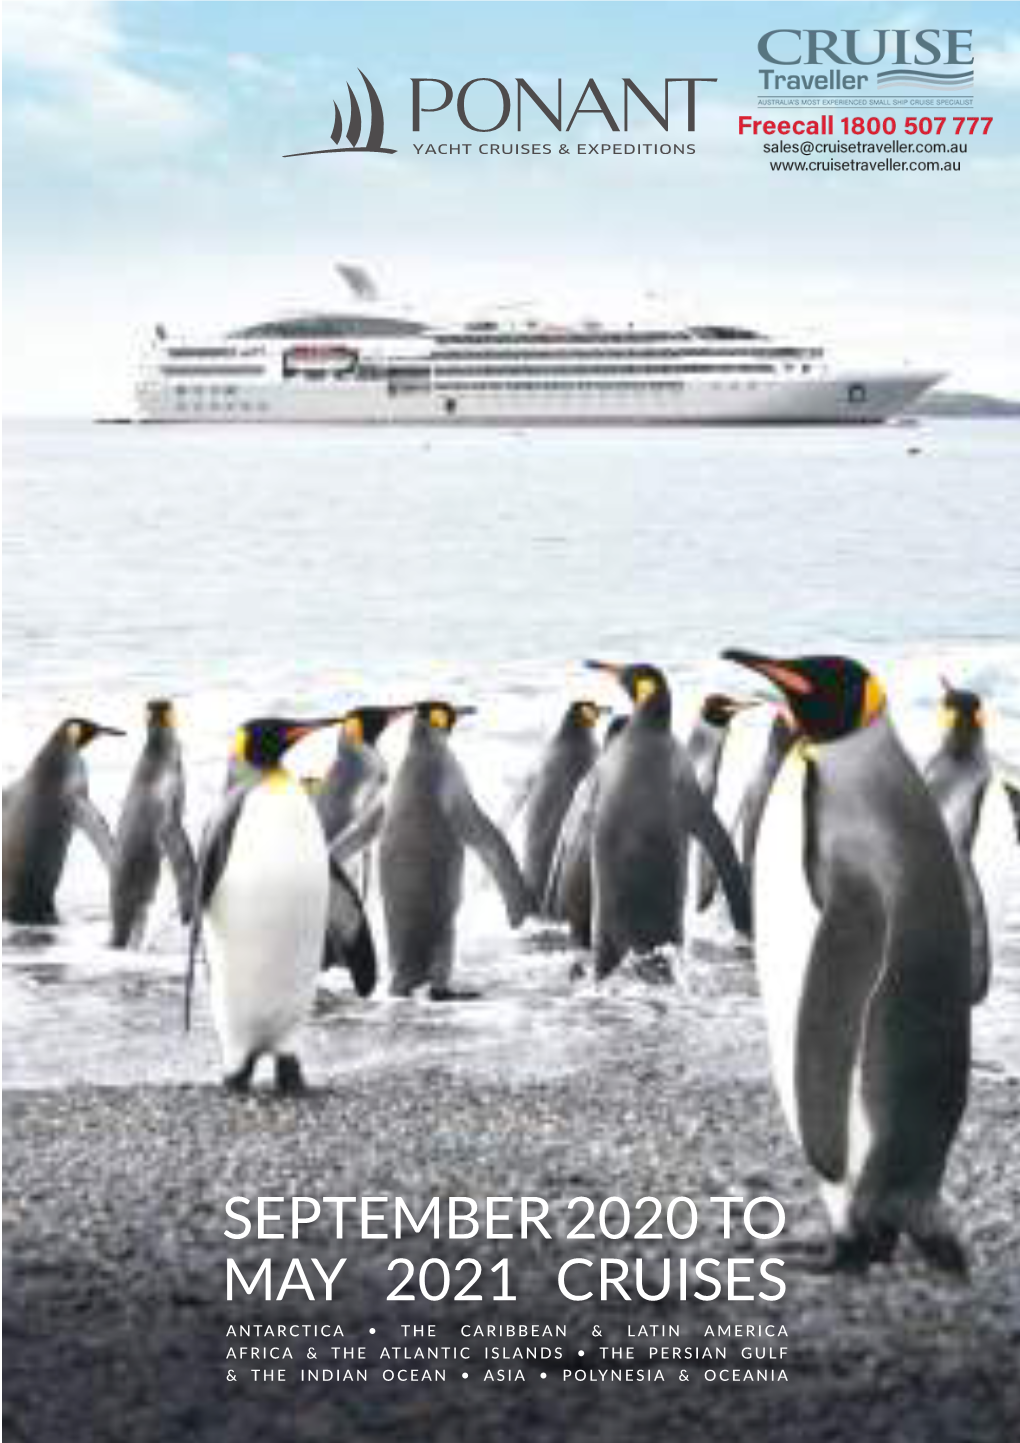 SEPTEMBER 2020 to MAY 2021 CRUISES 2 Dear Guests